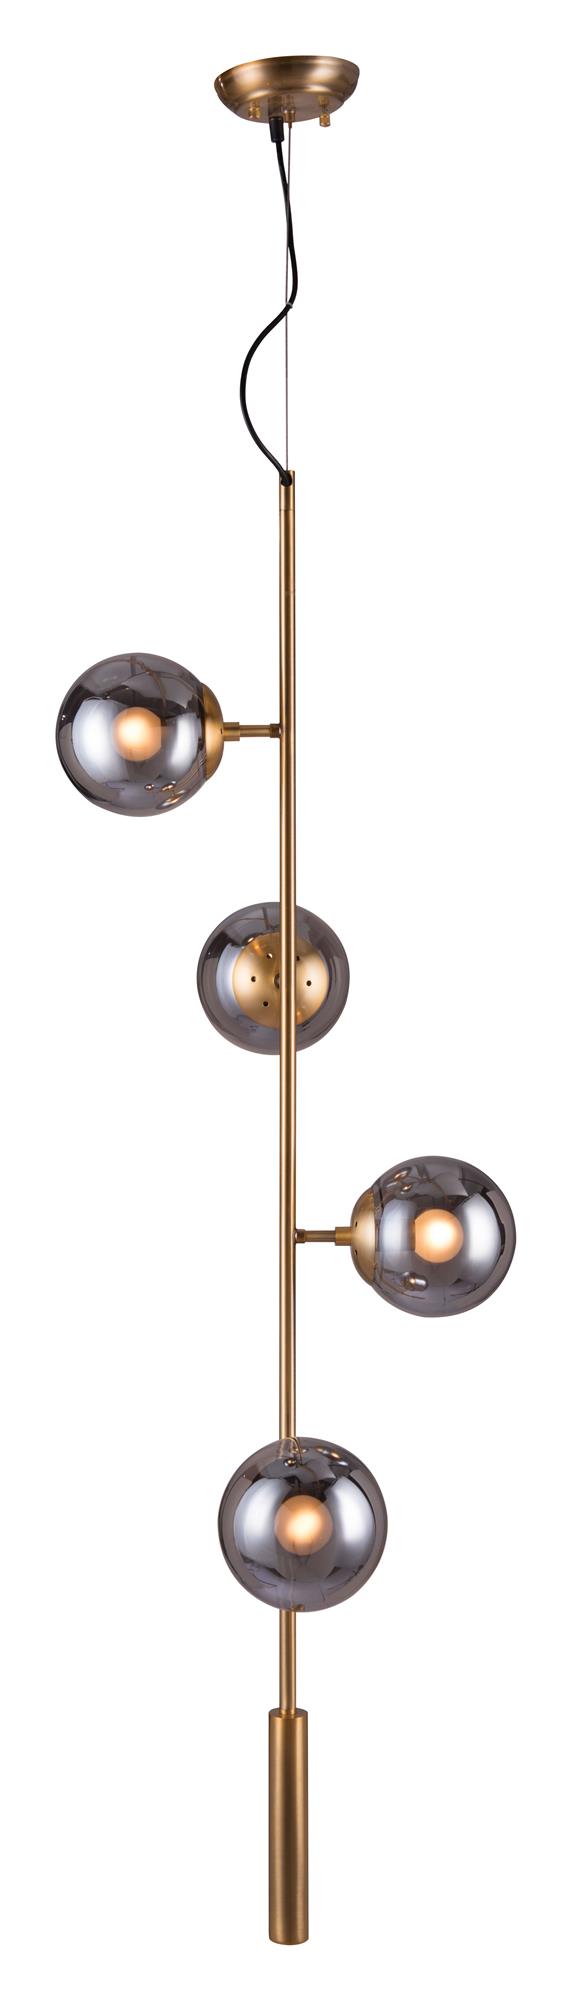 Flexible hanging lamp by Zola with adjustable cord -  N/A